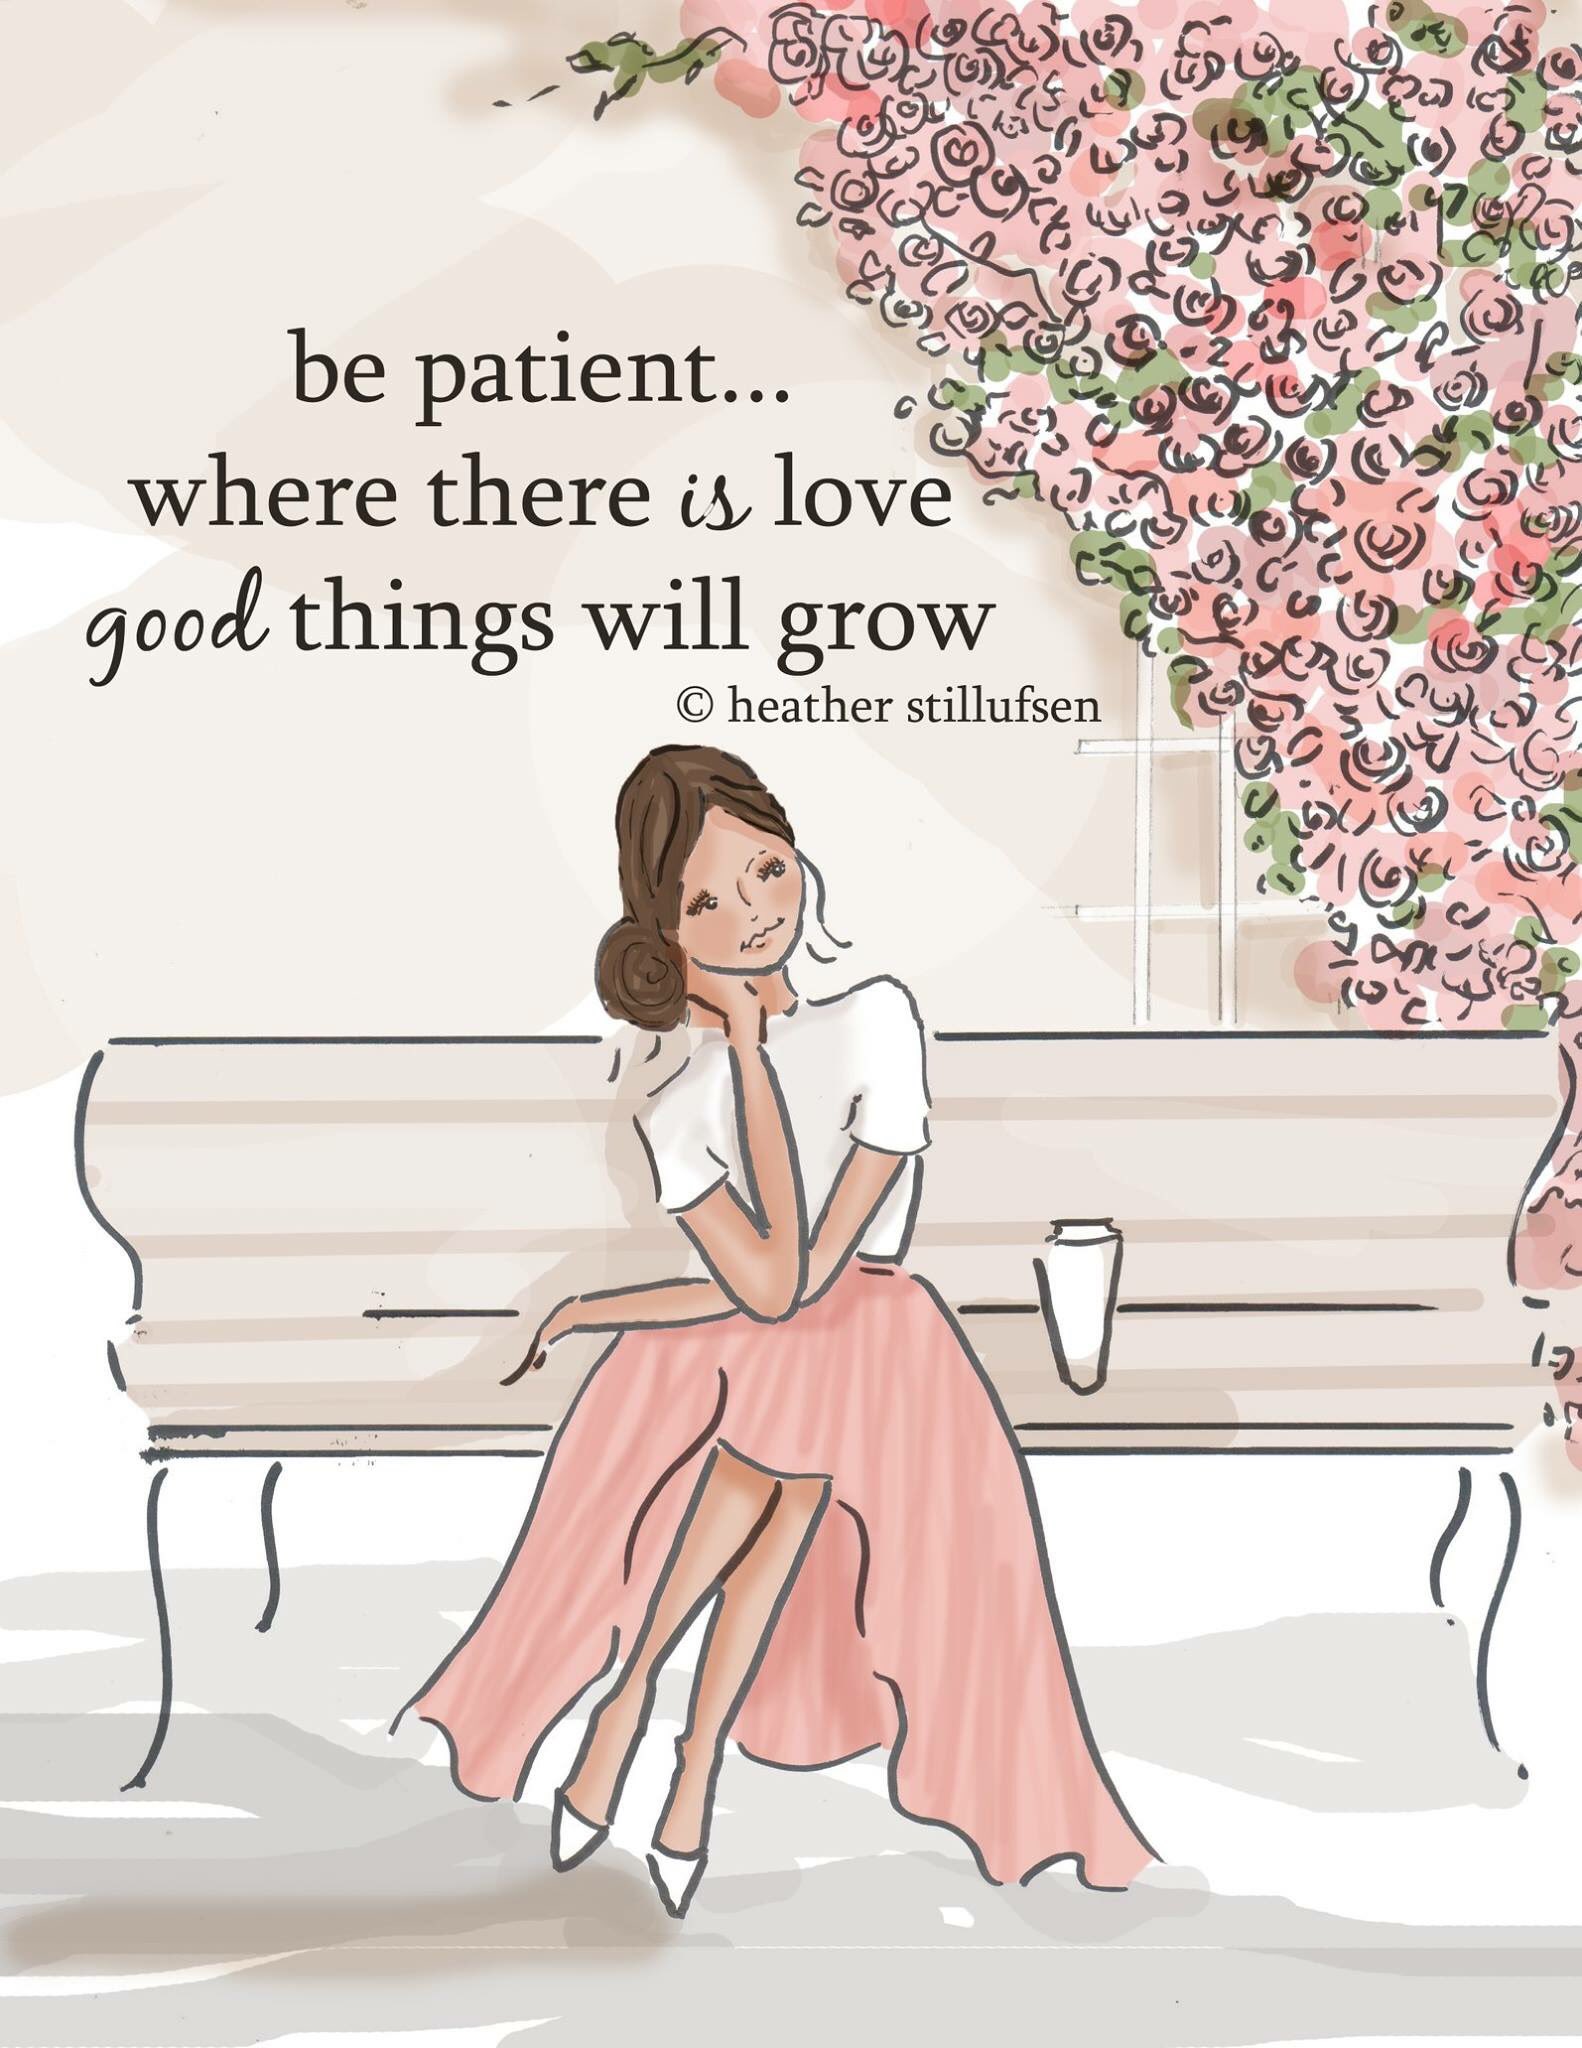 Heather Stillufsen on Twitter: "Where there is L💖VE #goodthings will